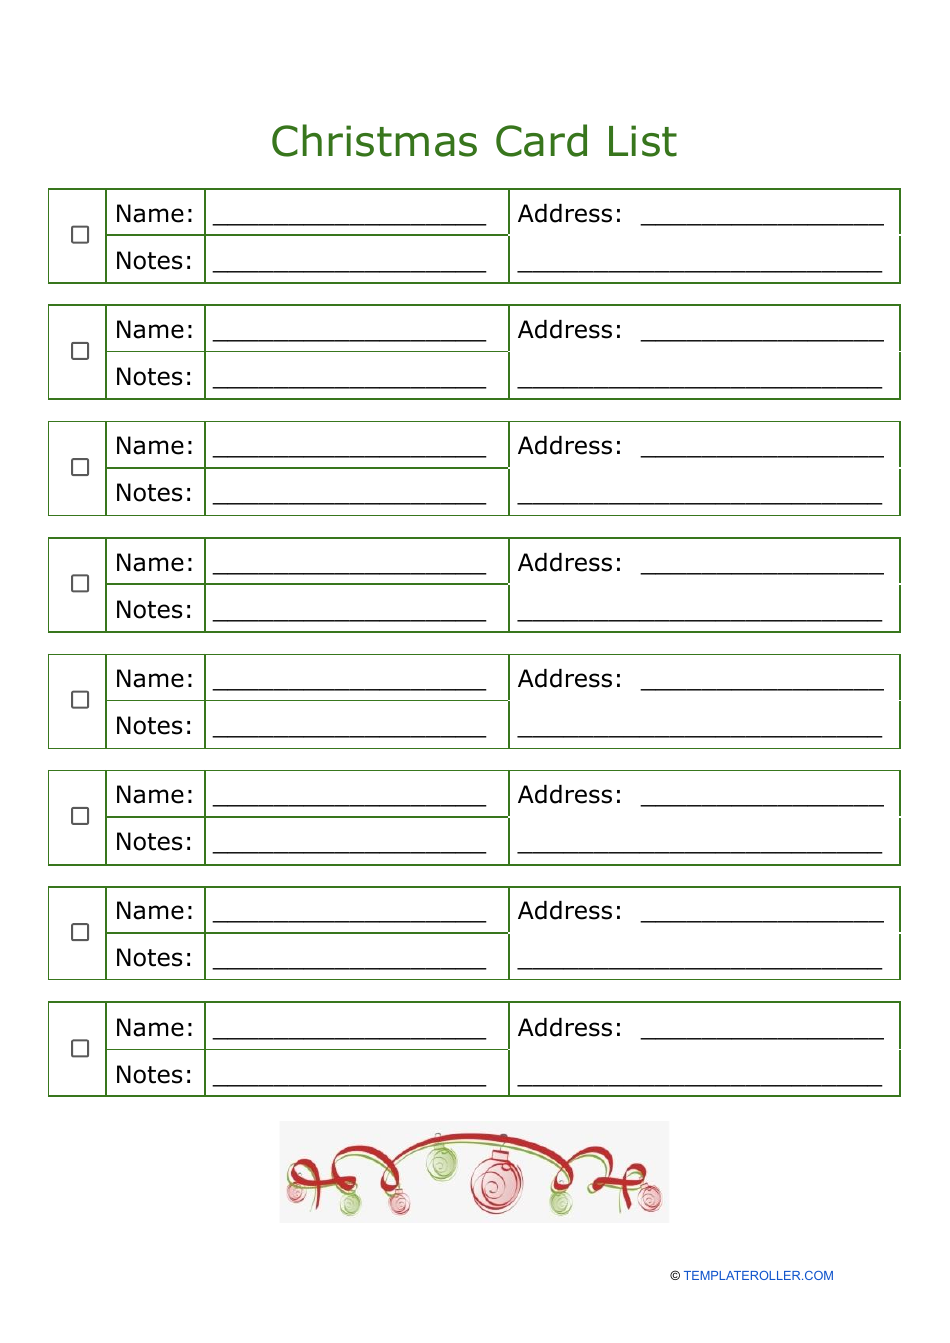 Christmas Card List Template - Green, Page 1